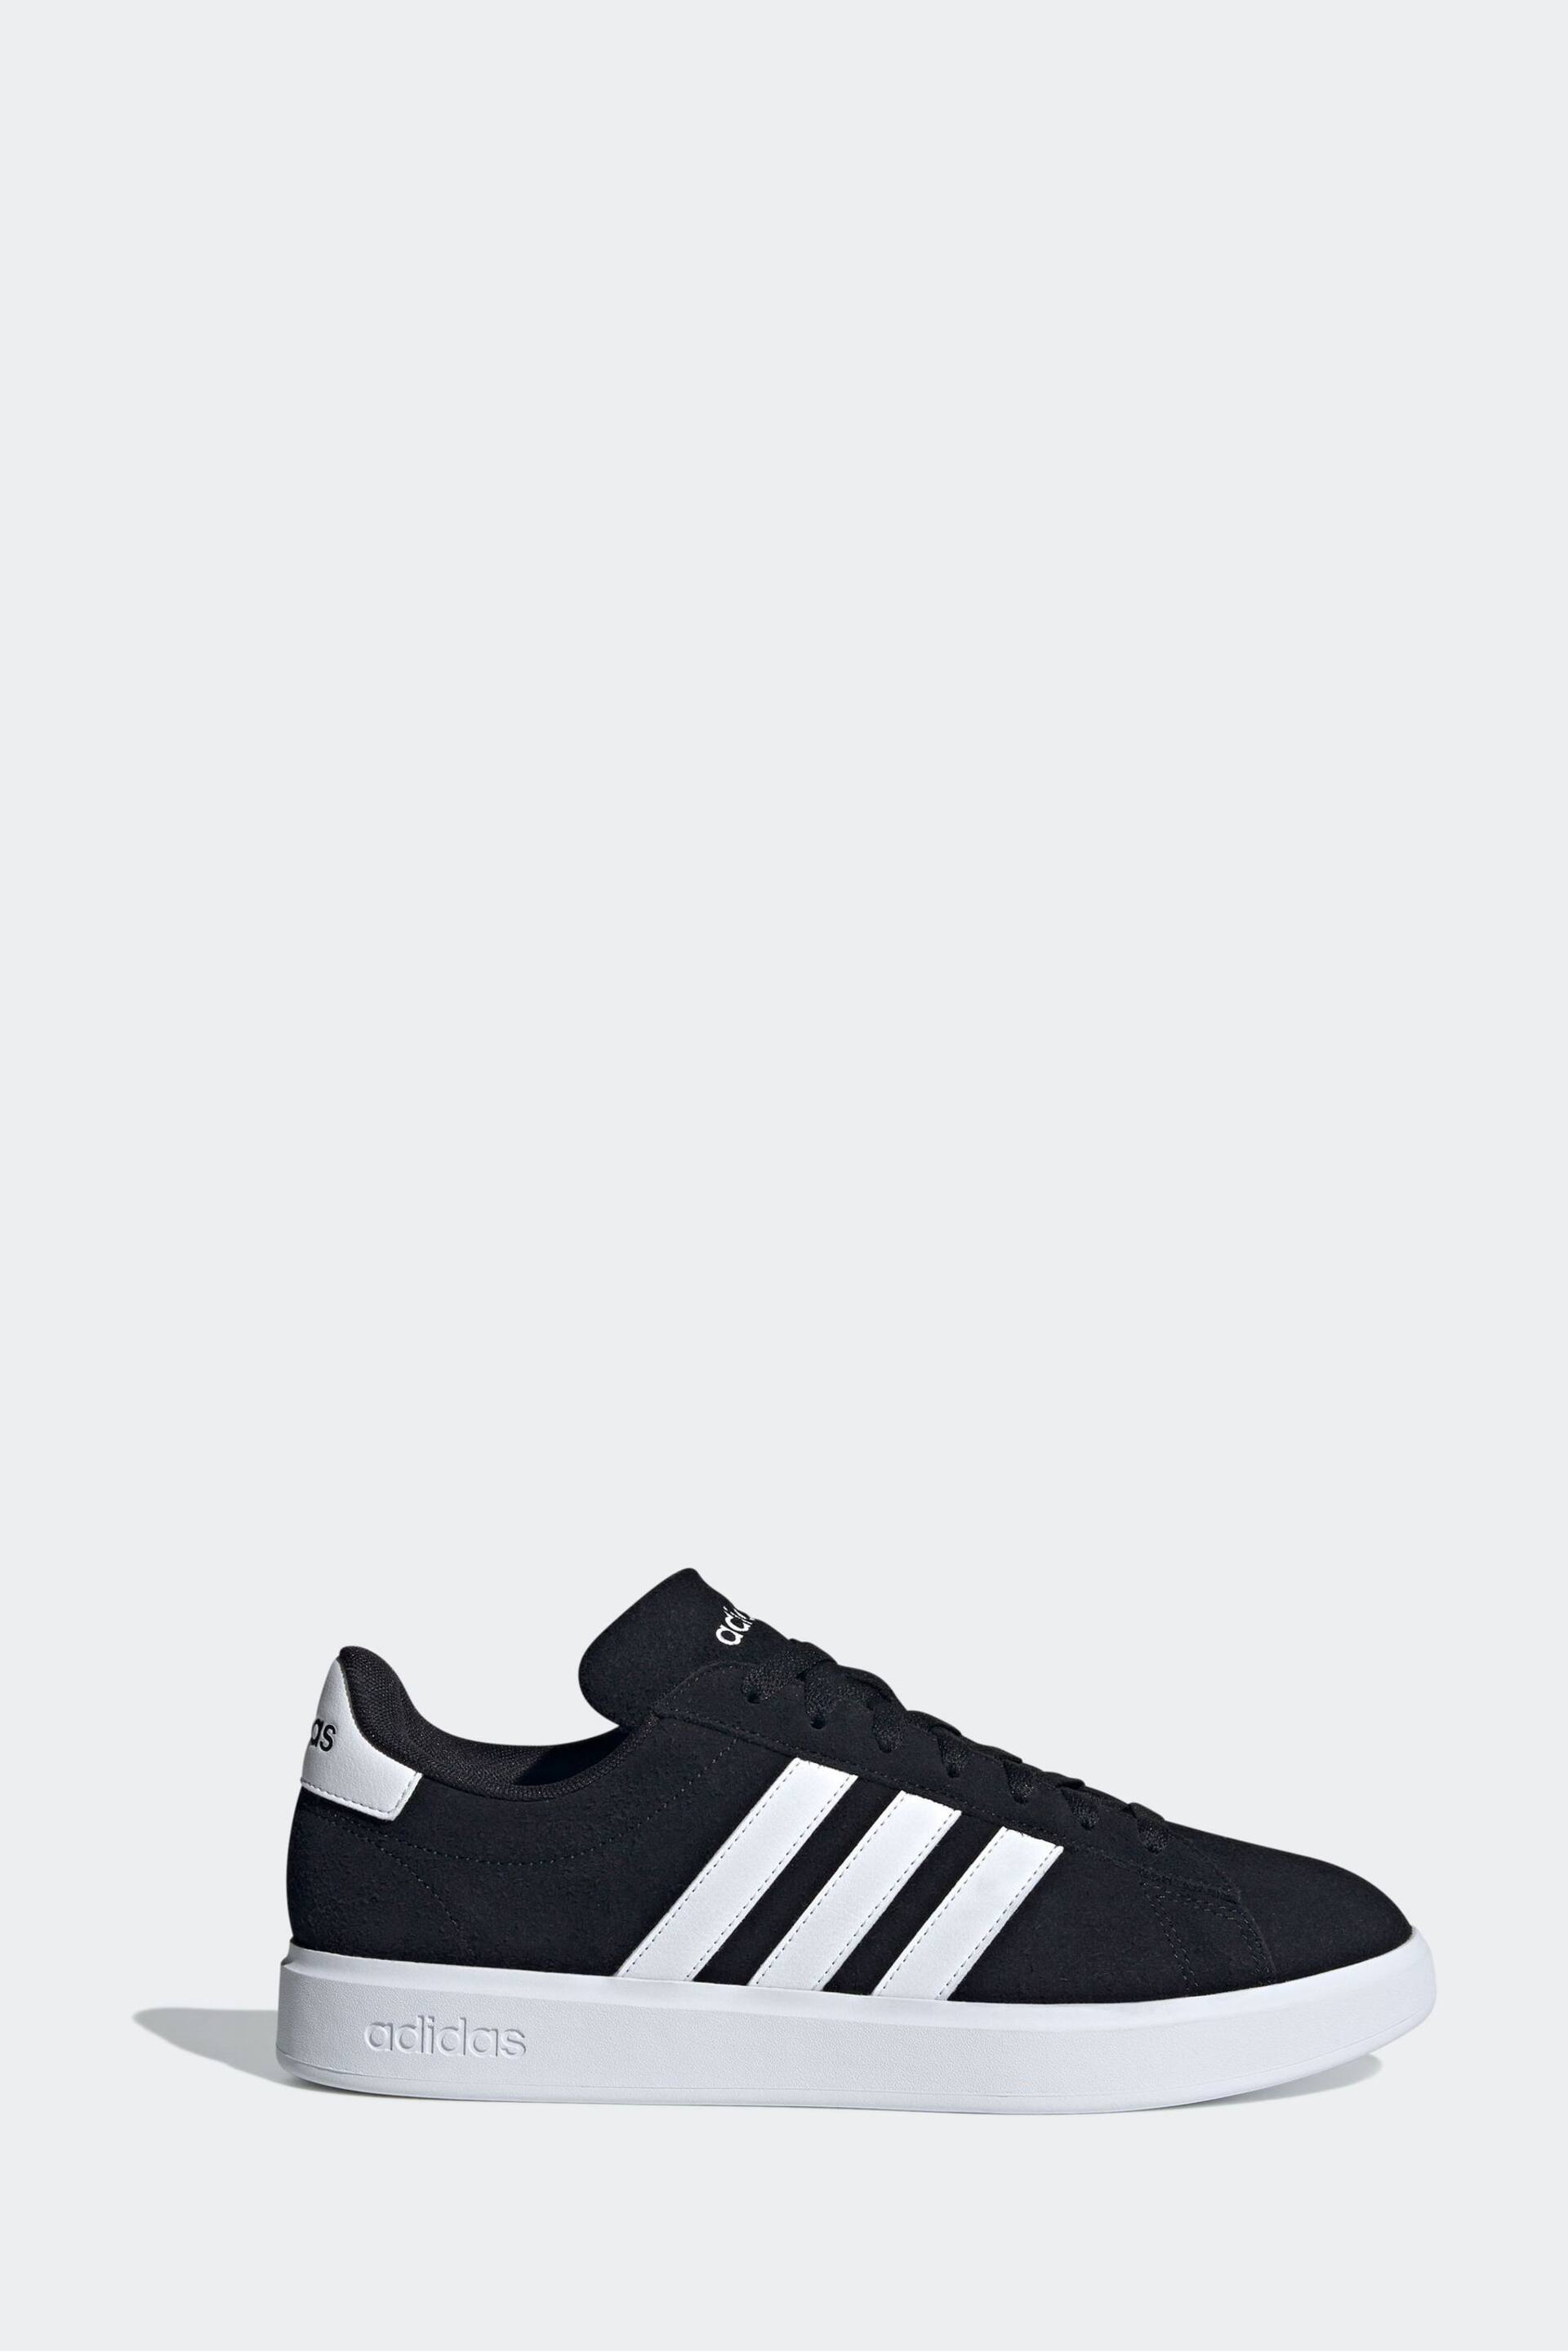 adidas Black Sportswear Grand Court 2.0 Trainers - Image 1 of 8